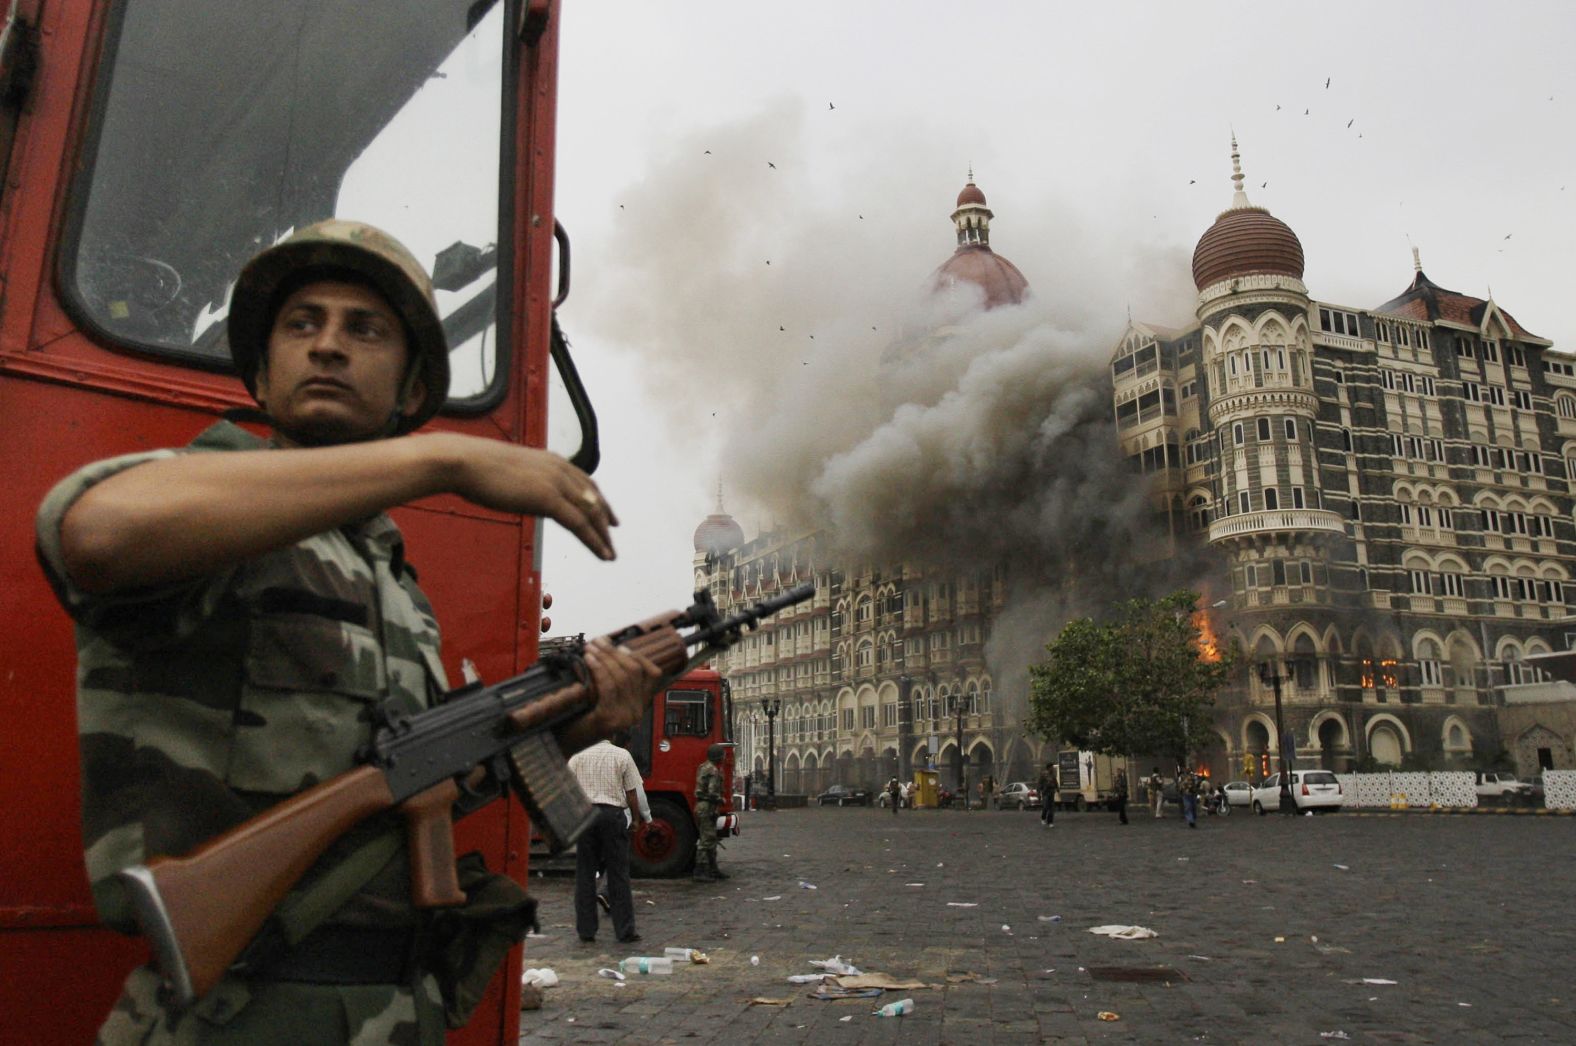 An Indian soldier takes cover as the Taj Hotel burns during gun battle between Indian military and militants inside in Mumbai, India on November 29, 2008. Ten Pakistani men associated with the terror group Lashkar-e-Tayyiba stormed buildings in Mumbai, killing 164 people. 